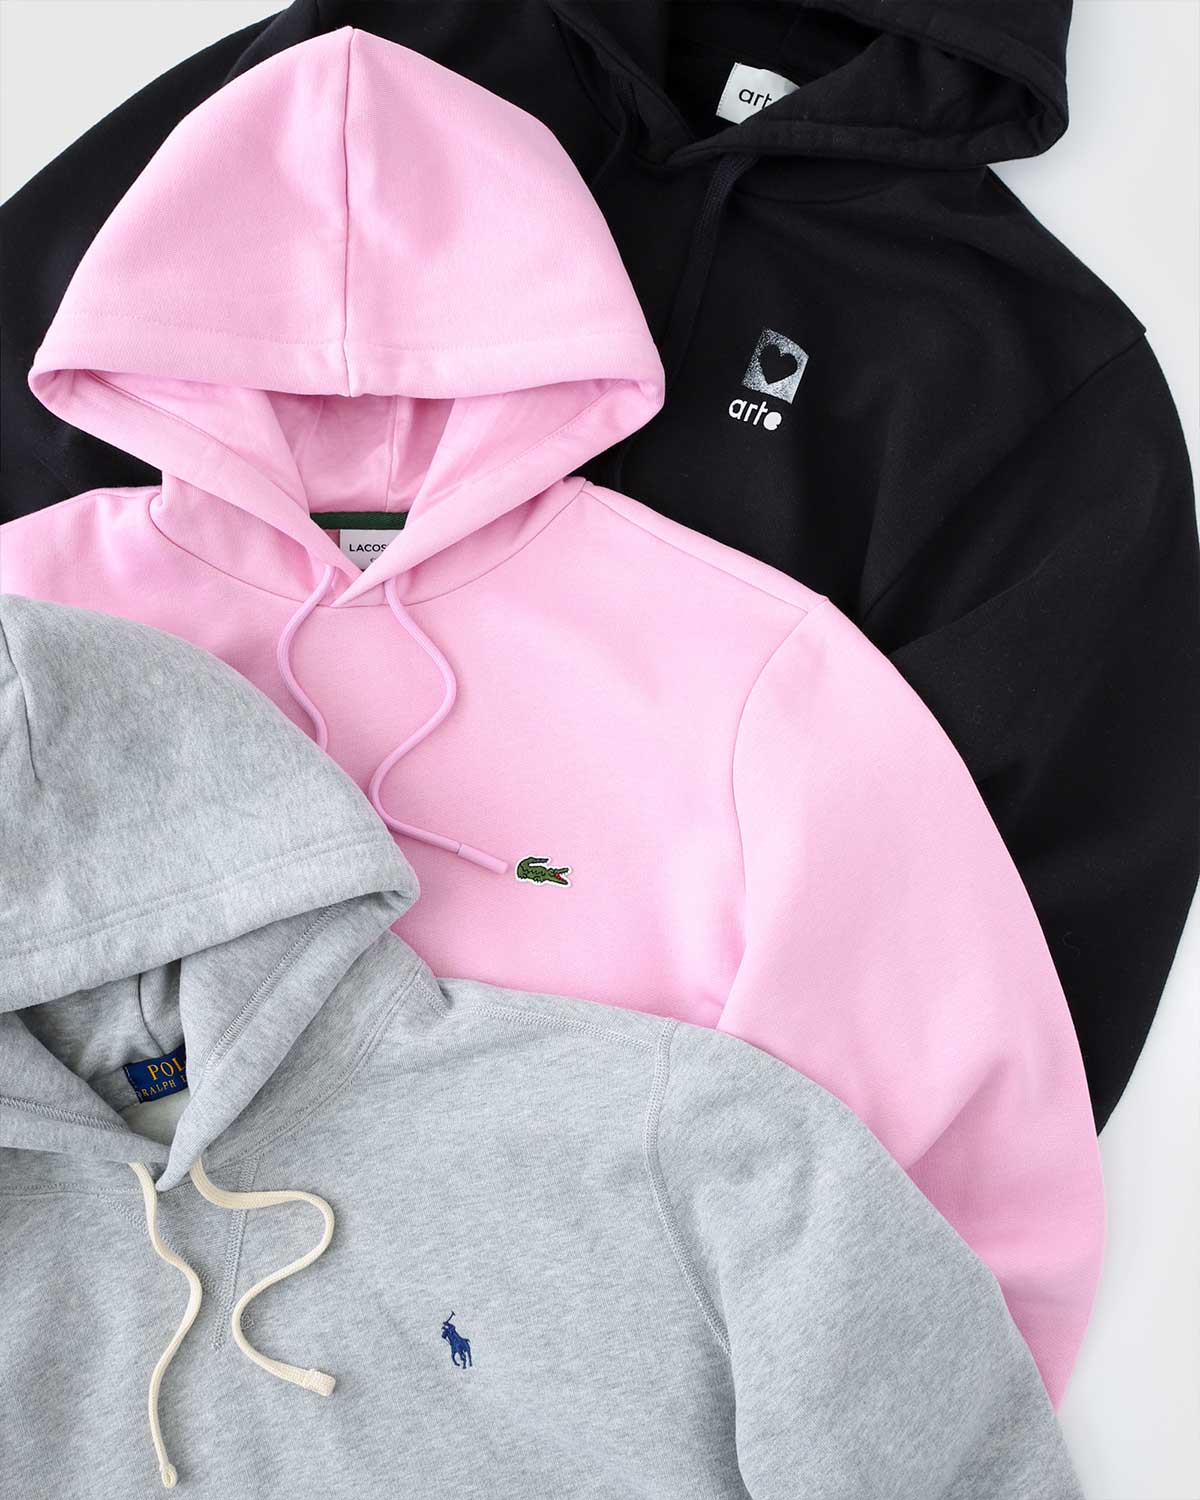 Shop your favourite hoodies for the upcoming season